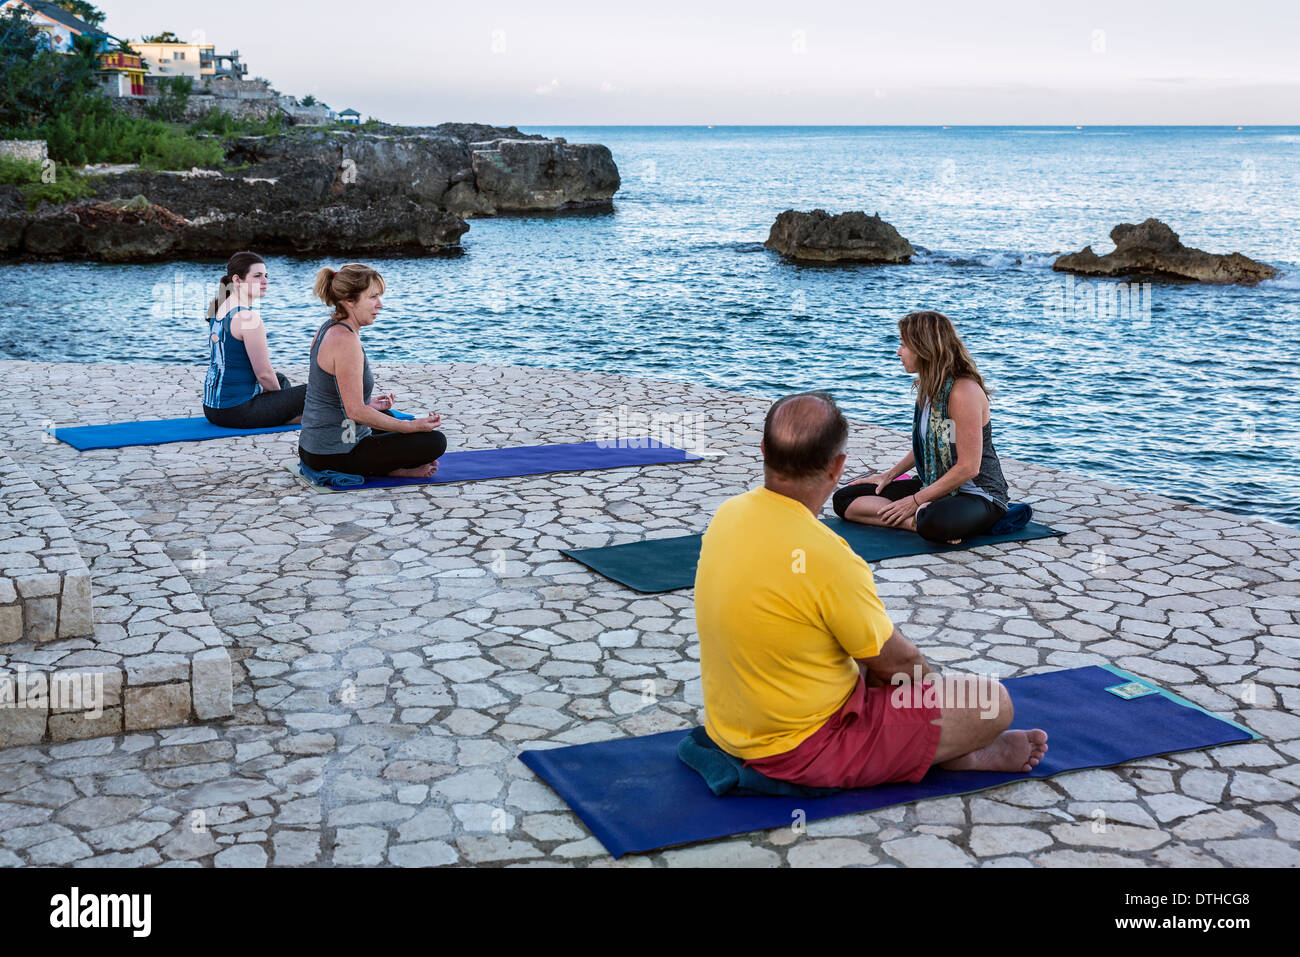 Waterfront instuction at a yoga retreat, Negril, Jamaica Stock Photo